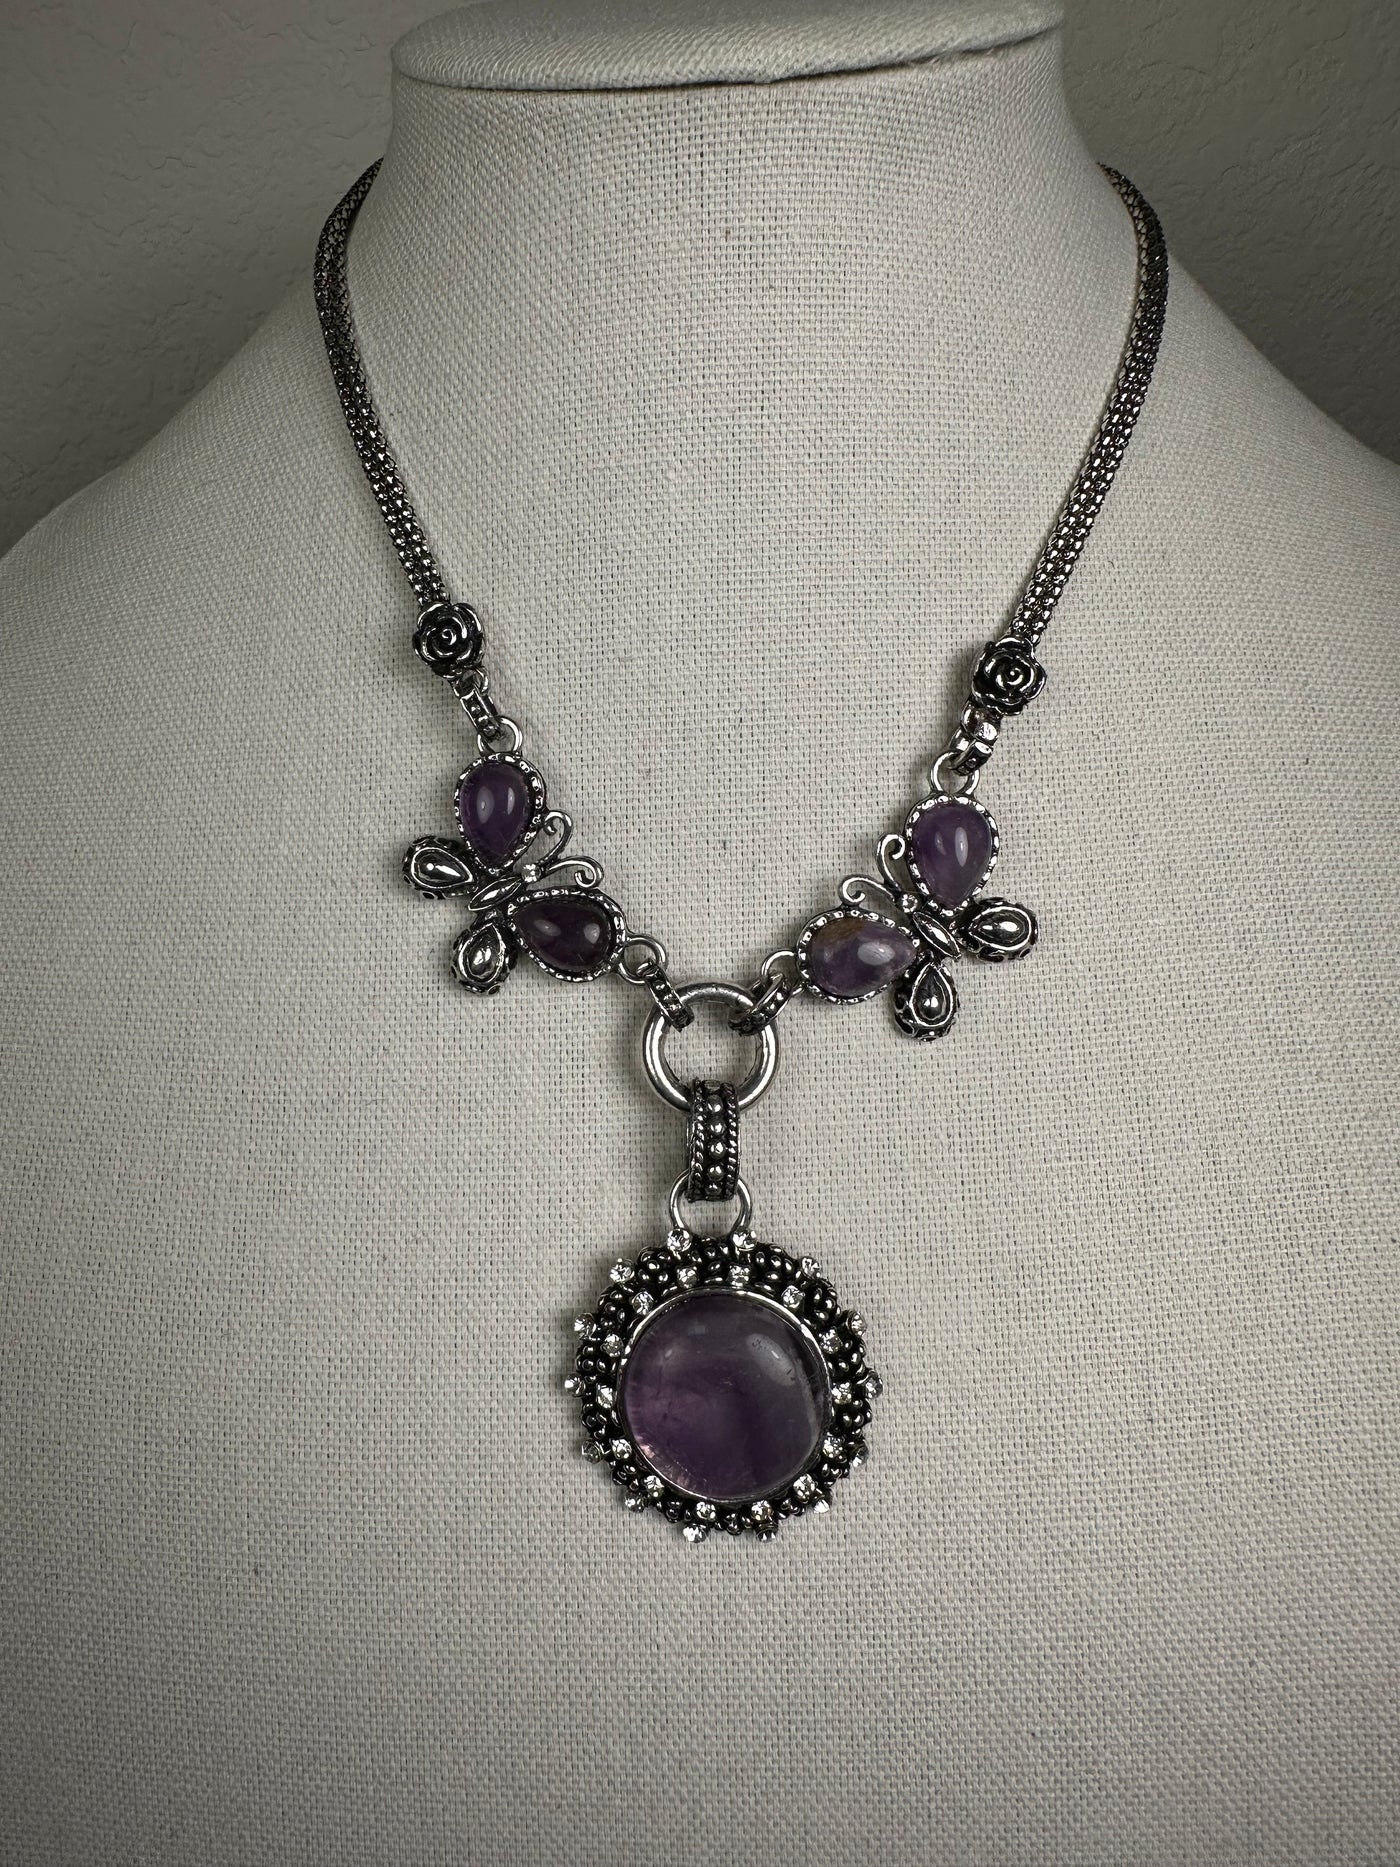 Silver Tone Ornate Necklace Decorated with Round Amethyst and Crystals